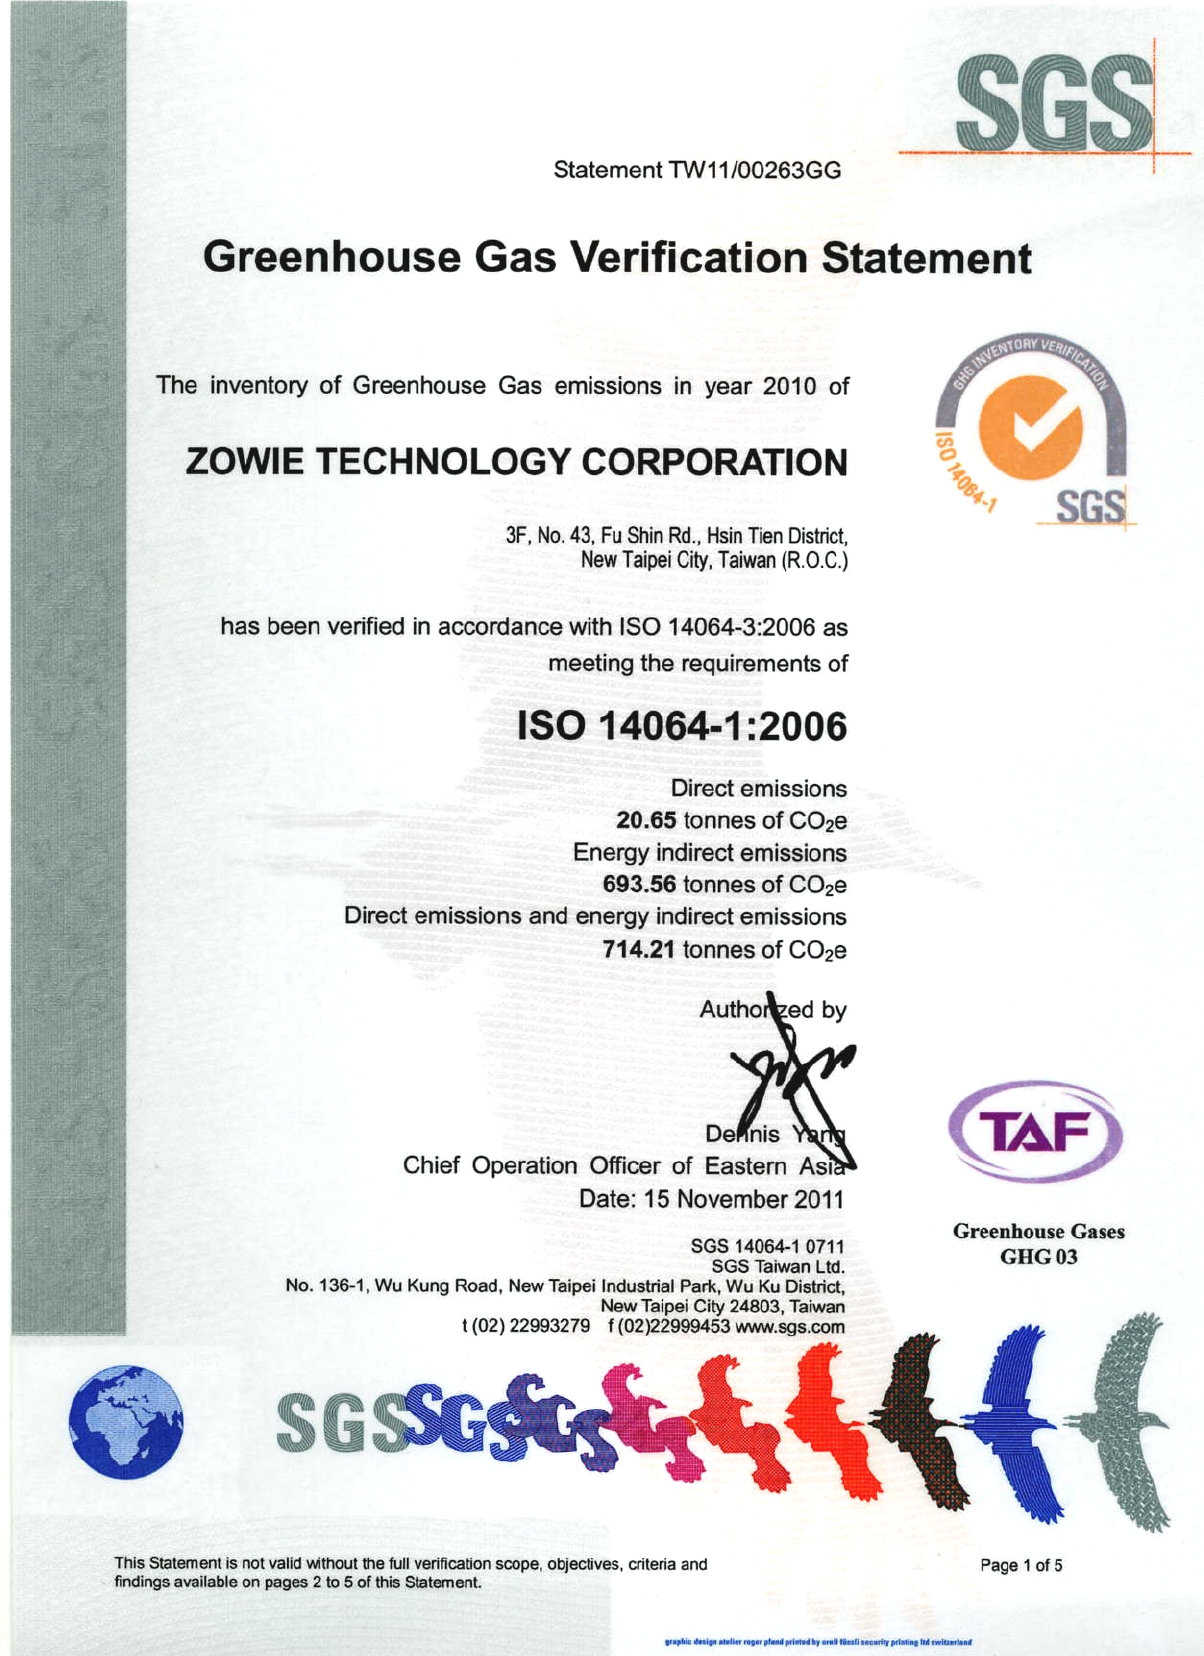 Zowie Technology Corp. passed the SGS ISO 14064-3 certification and obtained the Greenhouse Gas Verification statement.